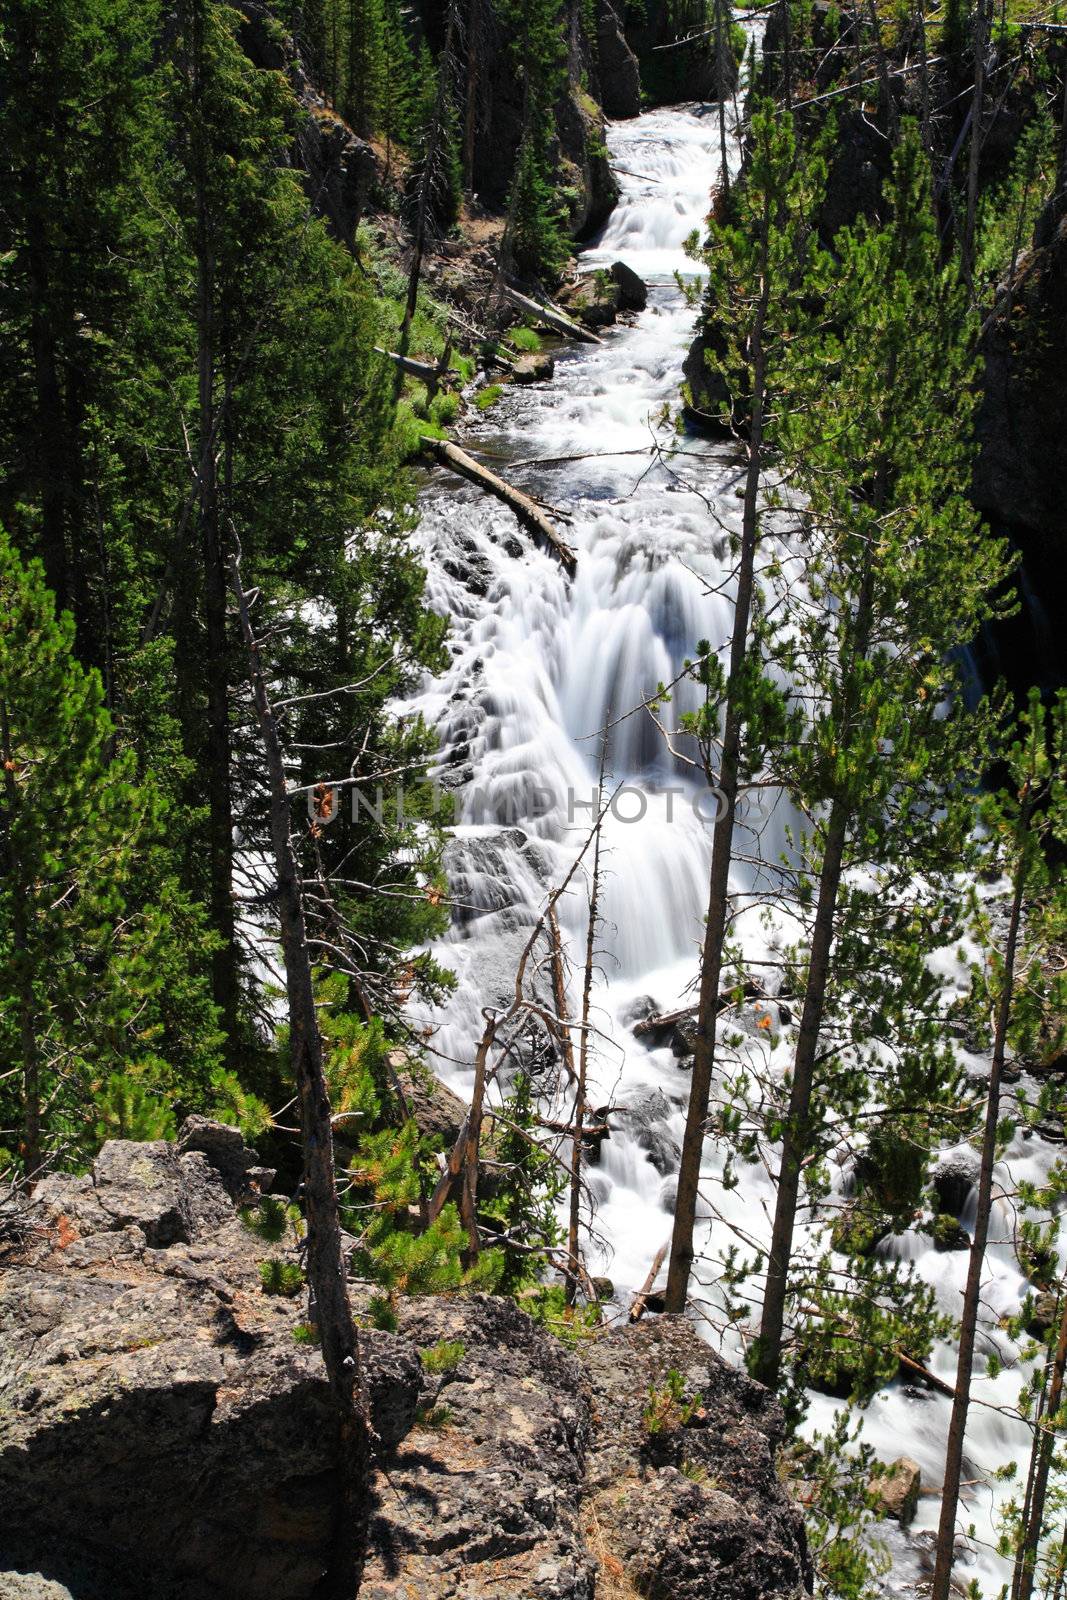 The Kepler Cascades in the Yellowstone National Park